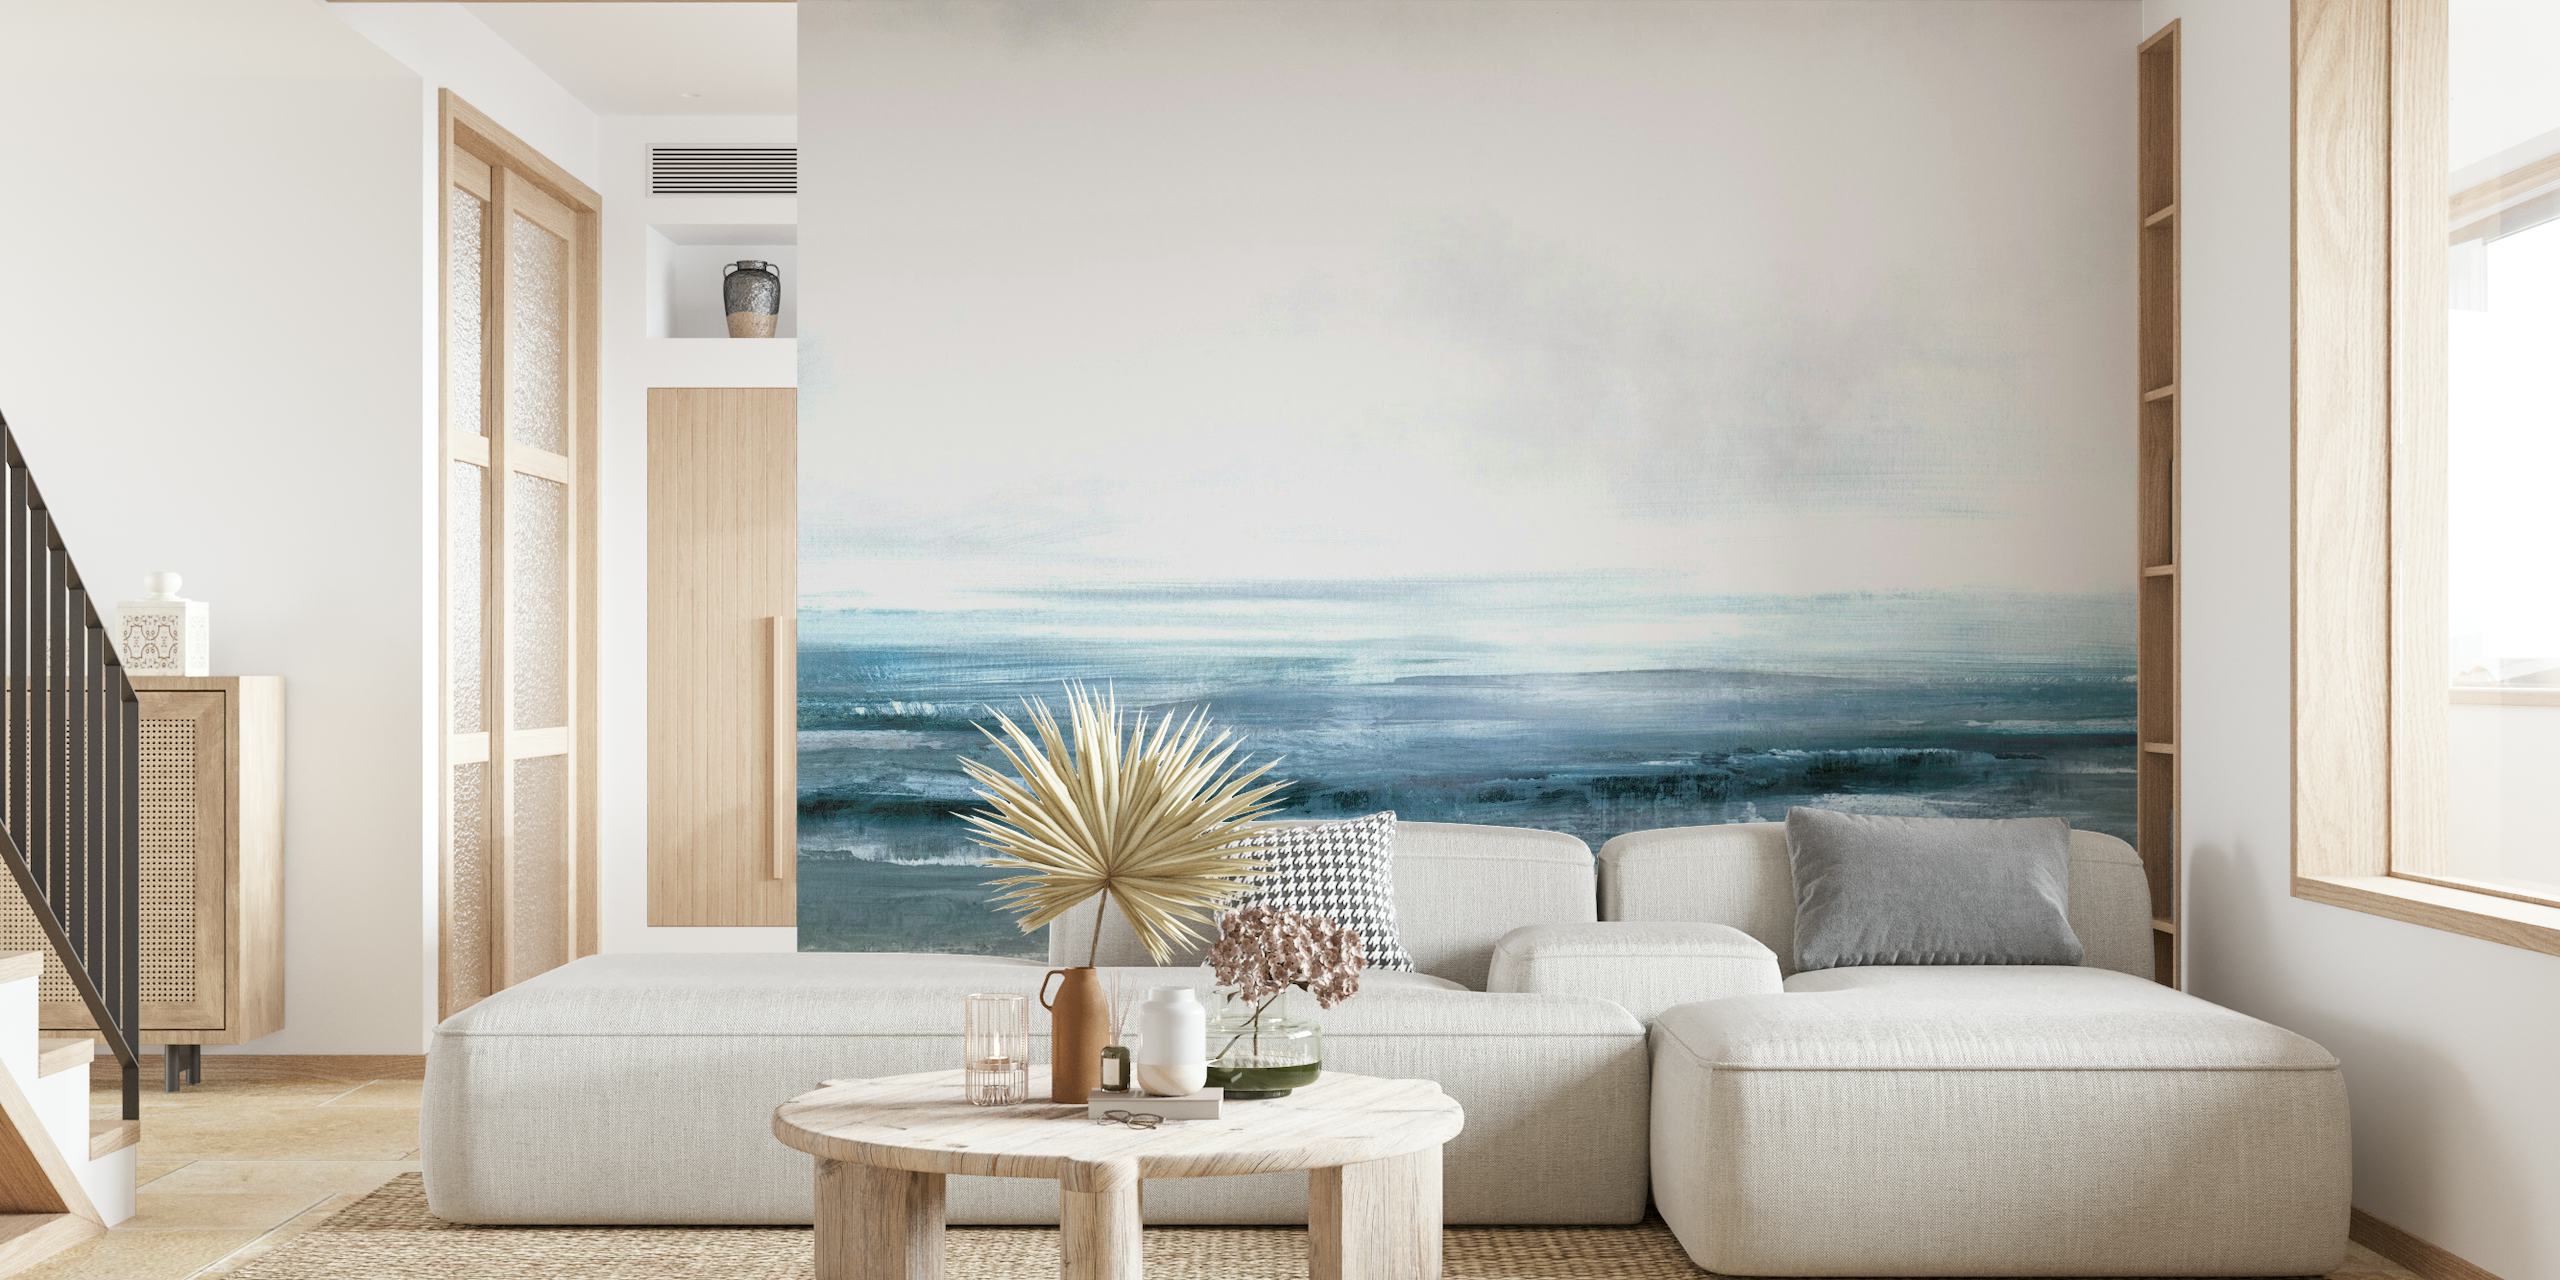 Tranquil ocean horizon wall mural with shades of blue and grey